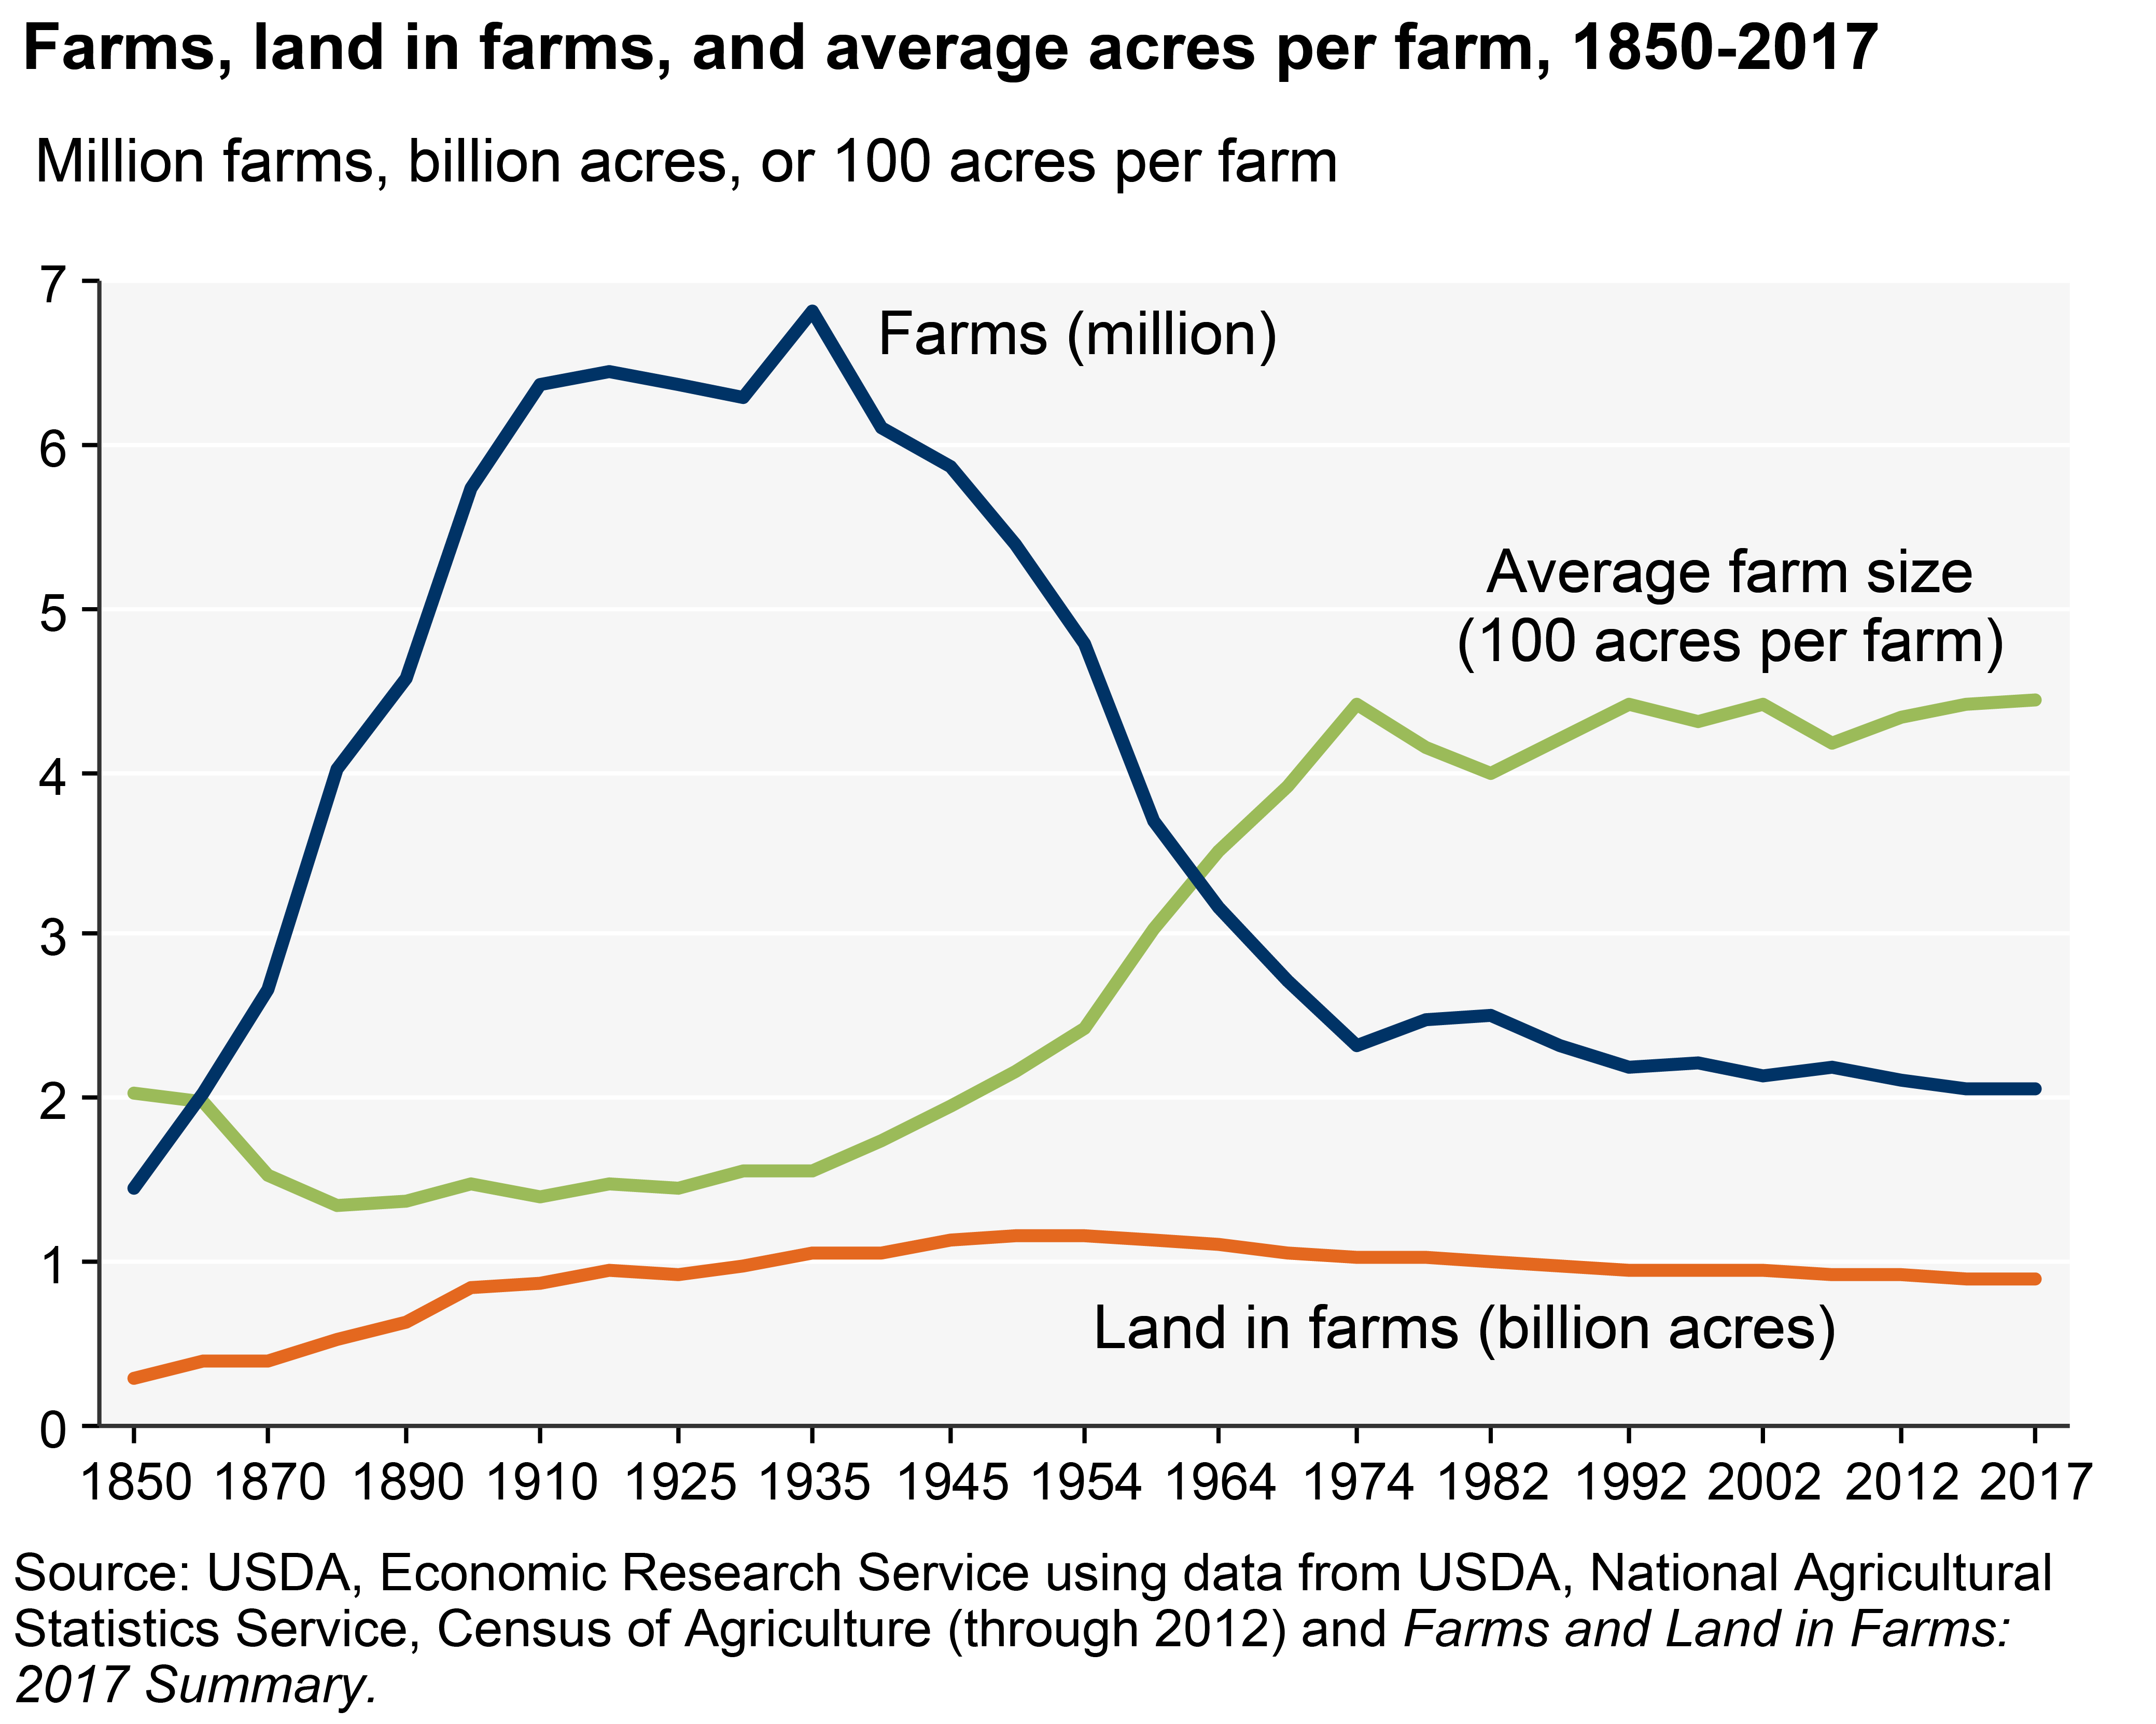 Since the mid-1930s, the number of U.S. farms has declined sharply and average farm size has increased. USDA